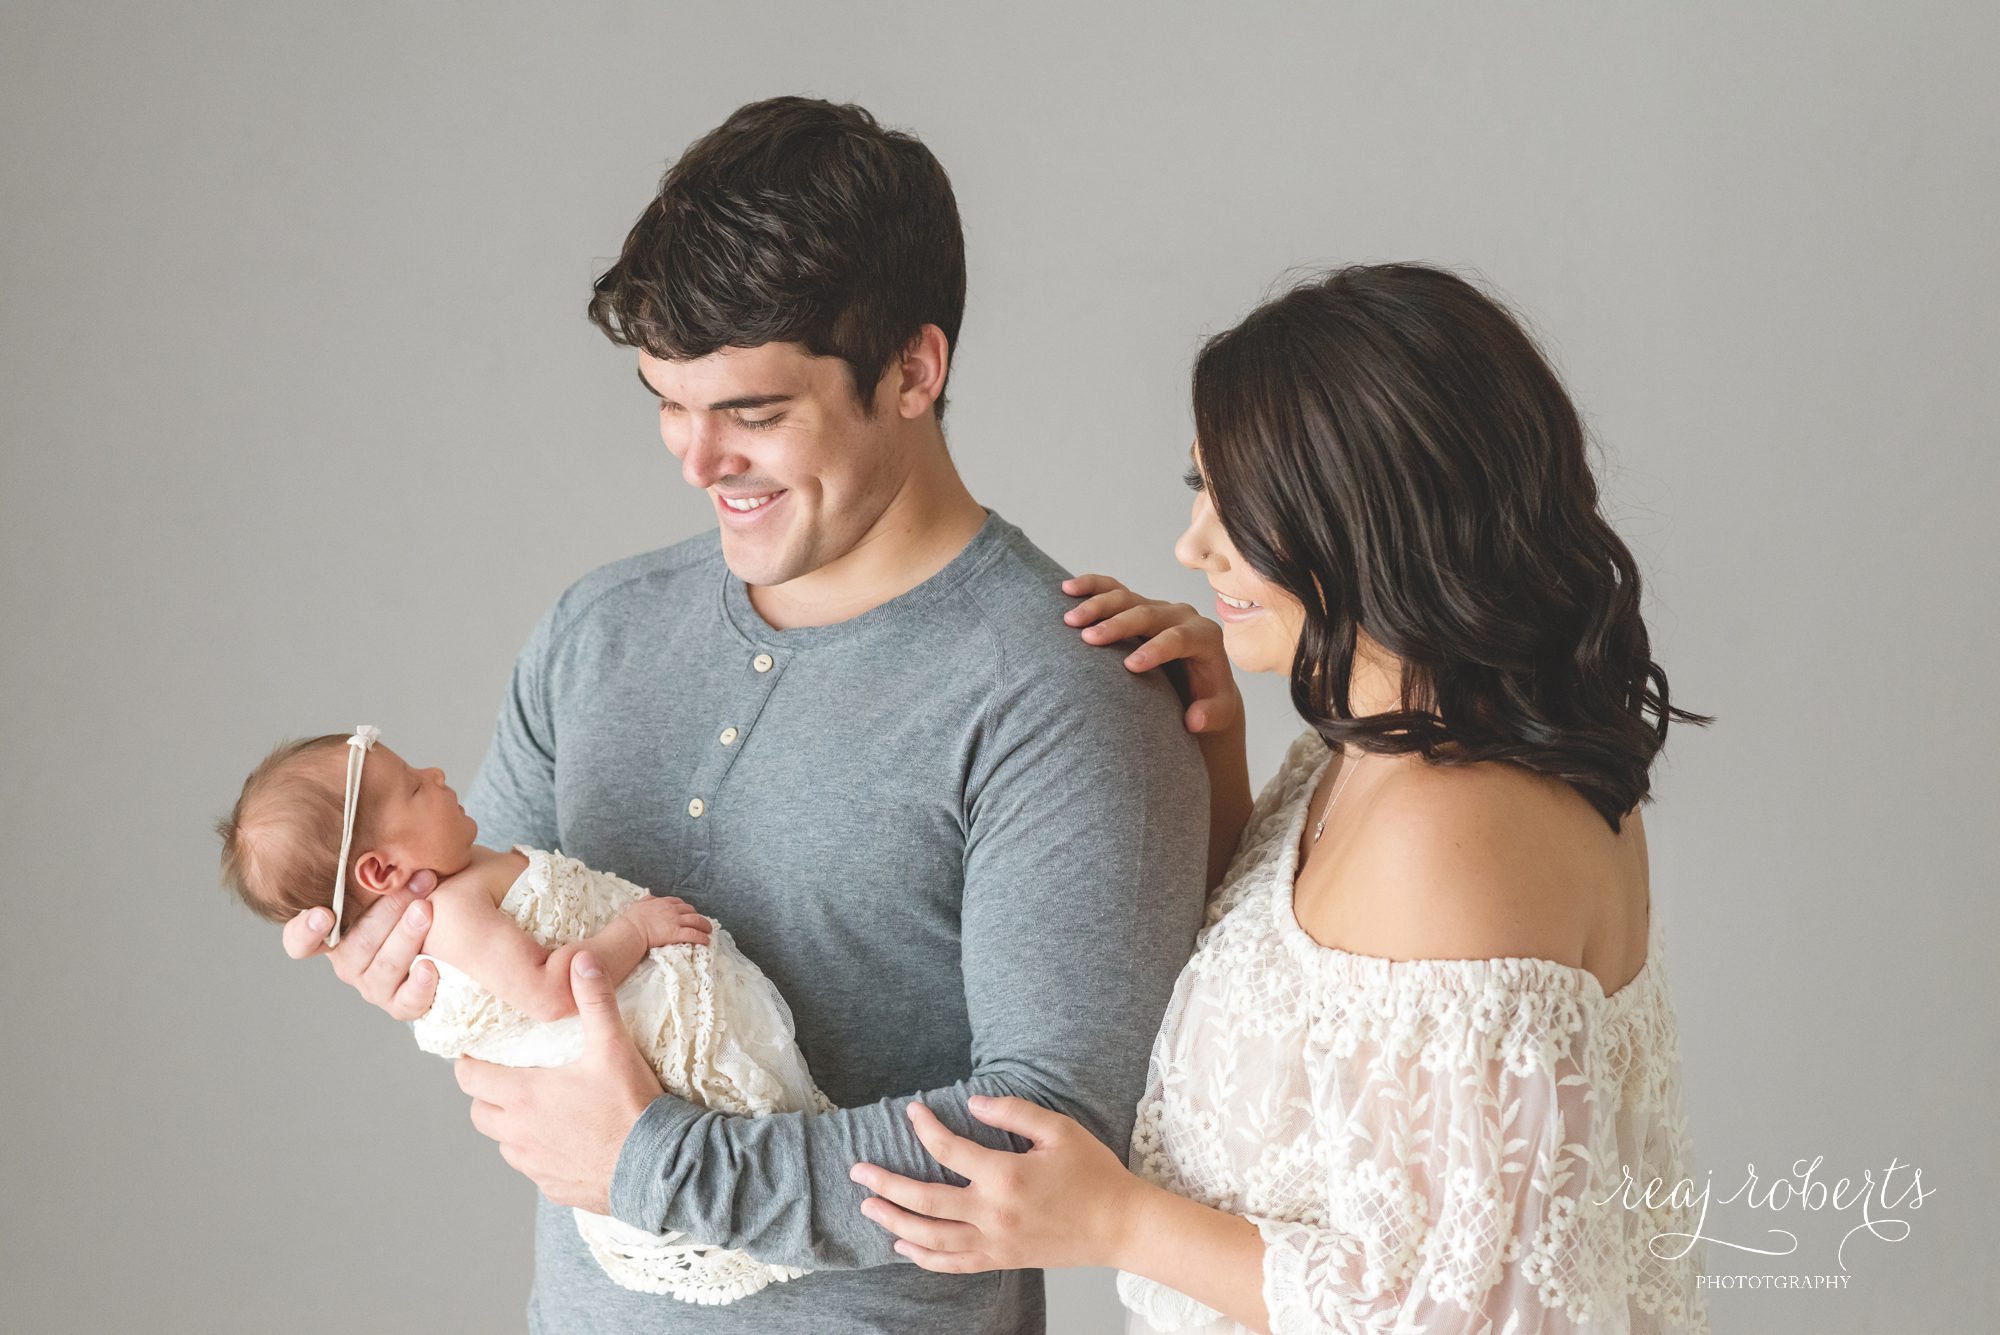 newborn photos with mom and dad | Reaj Roberts Photography